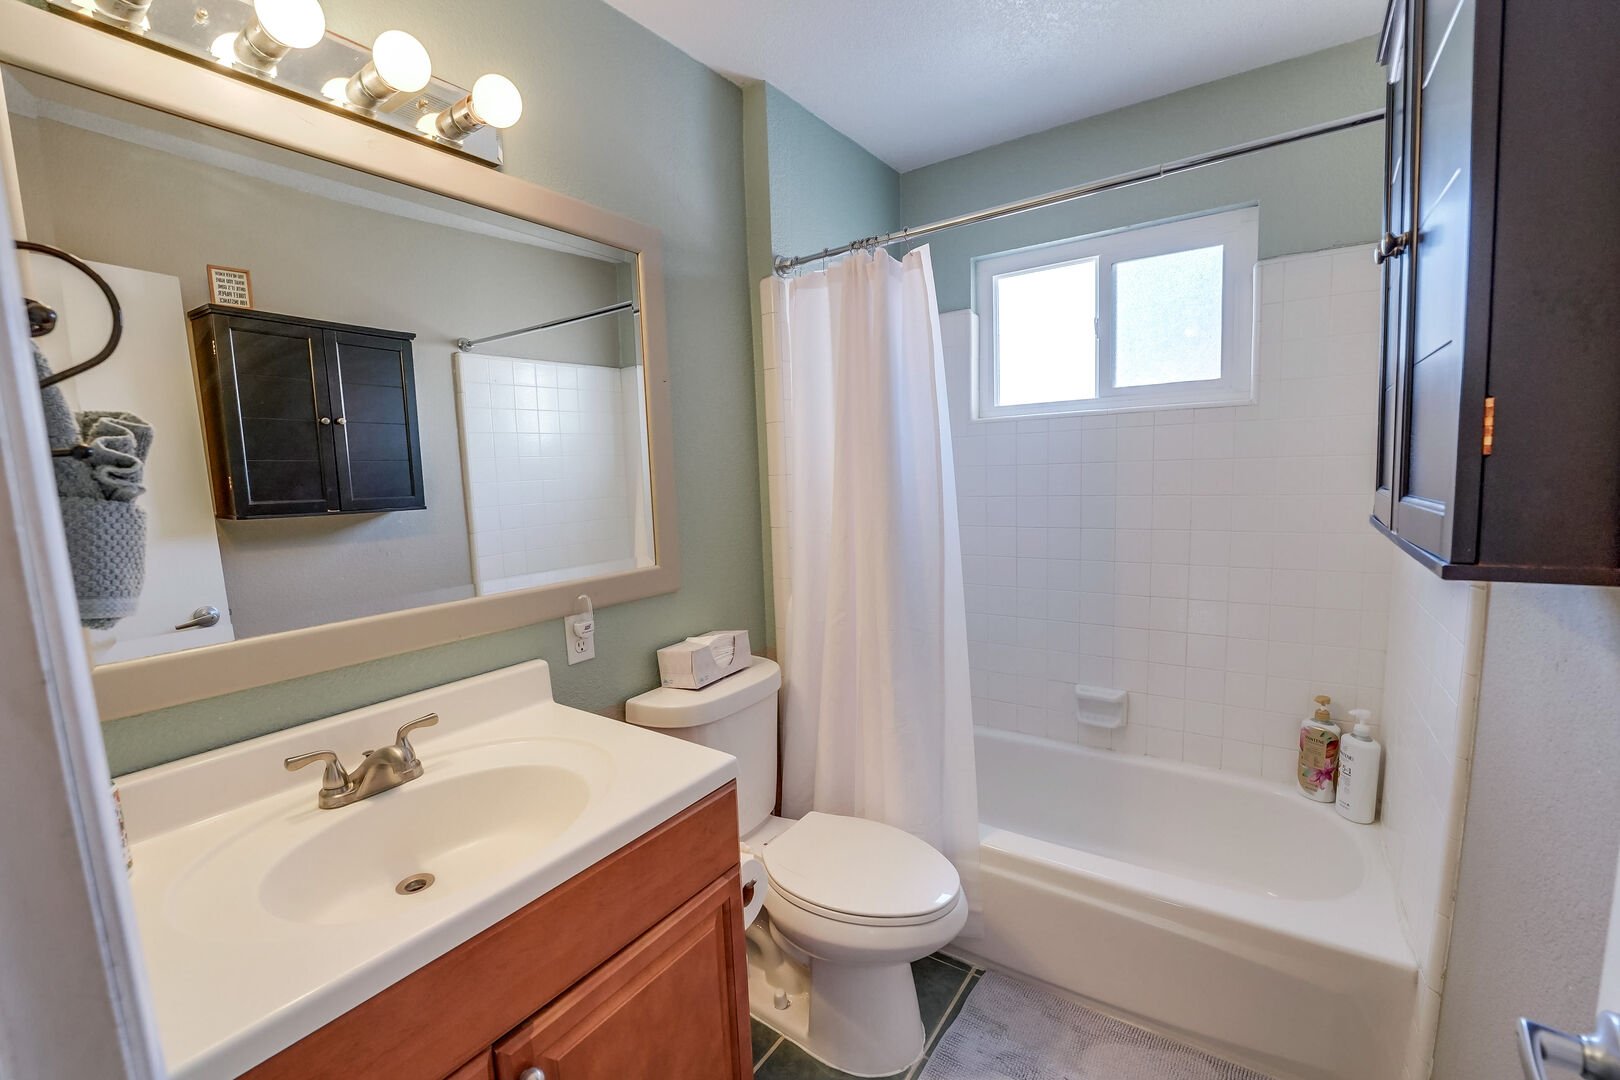 Guest full bathroom with shower/tub combo, shared between 2 guest rooms